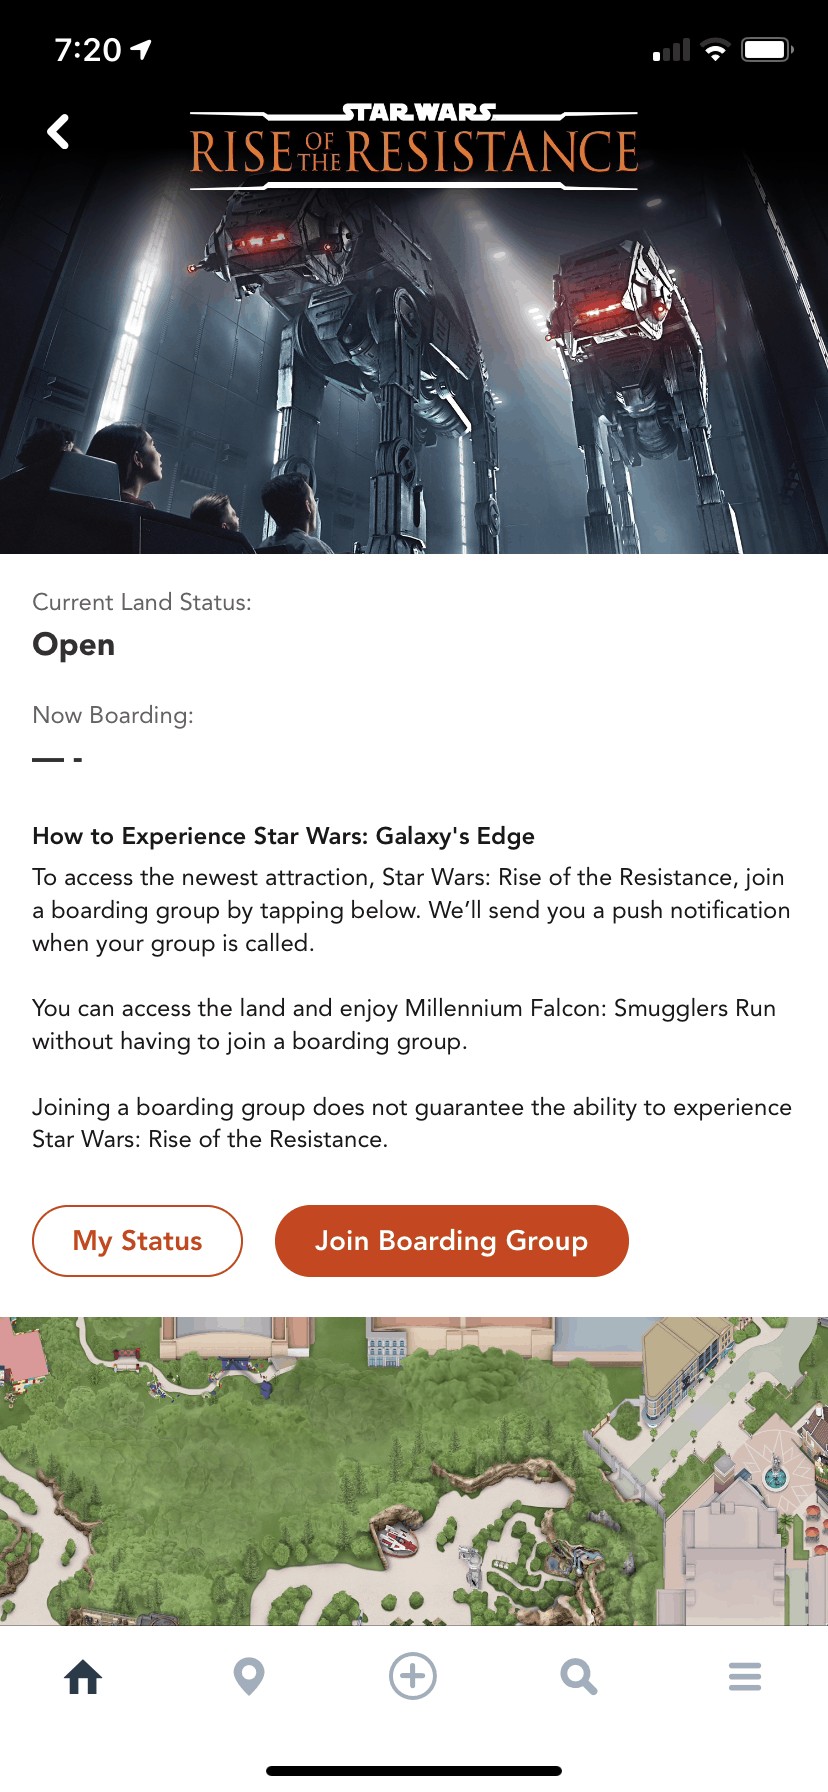 Procedure for getting on the ride; Rise of the Resistance at Disney's